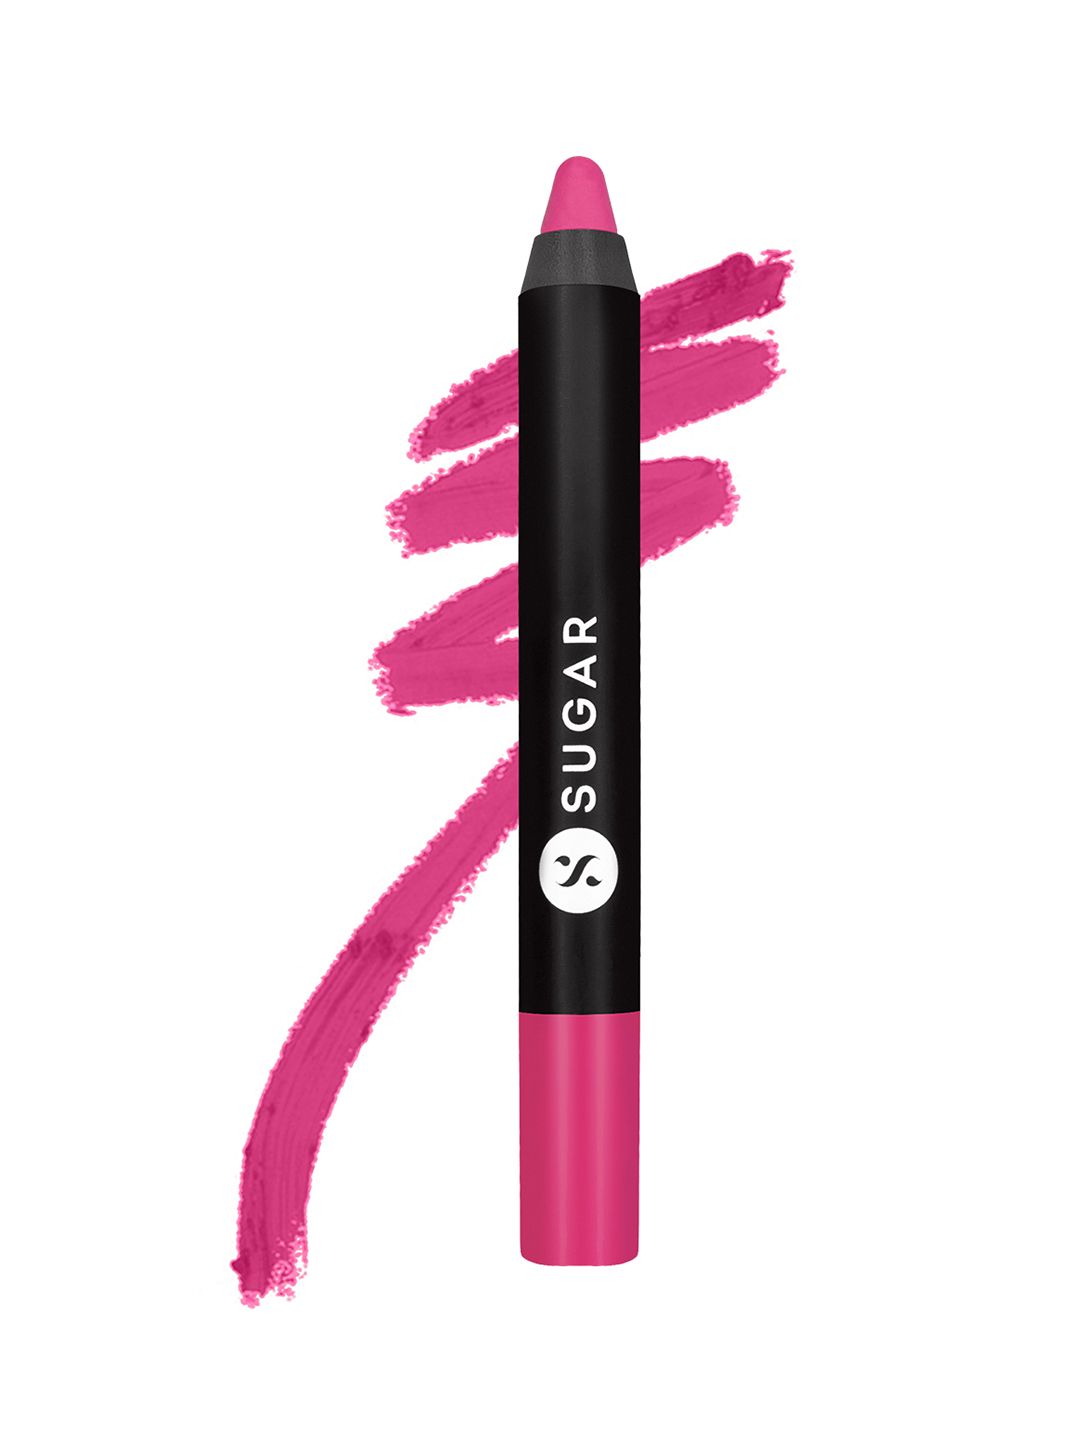 SUGAR Matte As Hell Crayon Lipstick - Mary Poppins 02 - with Sharpener Price in India